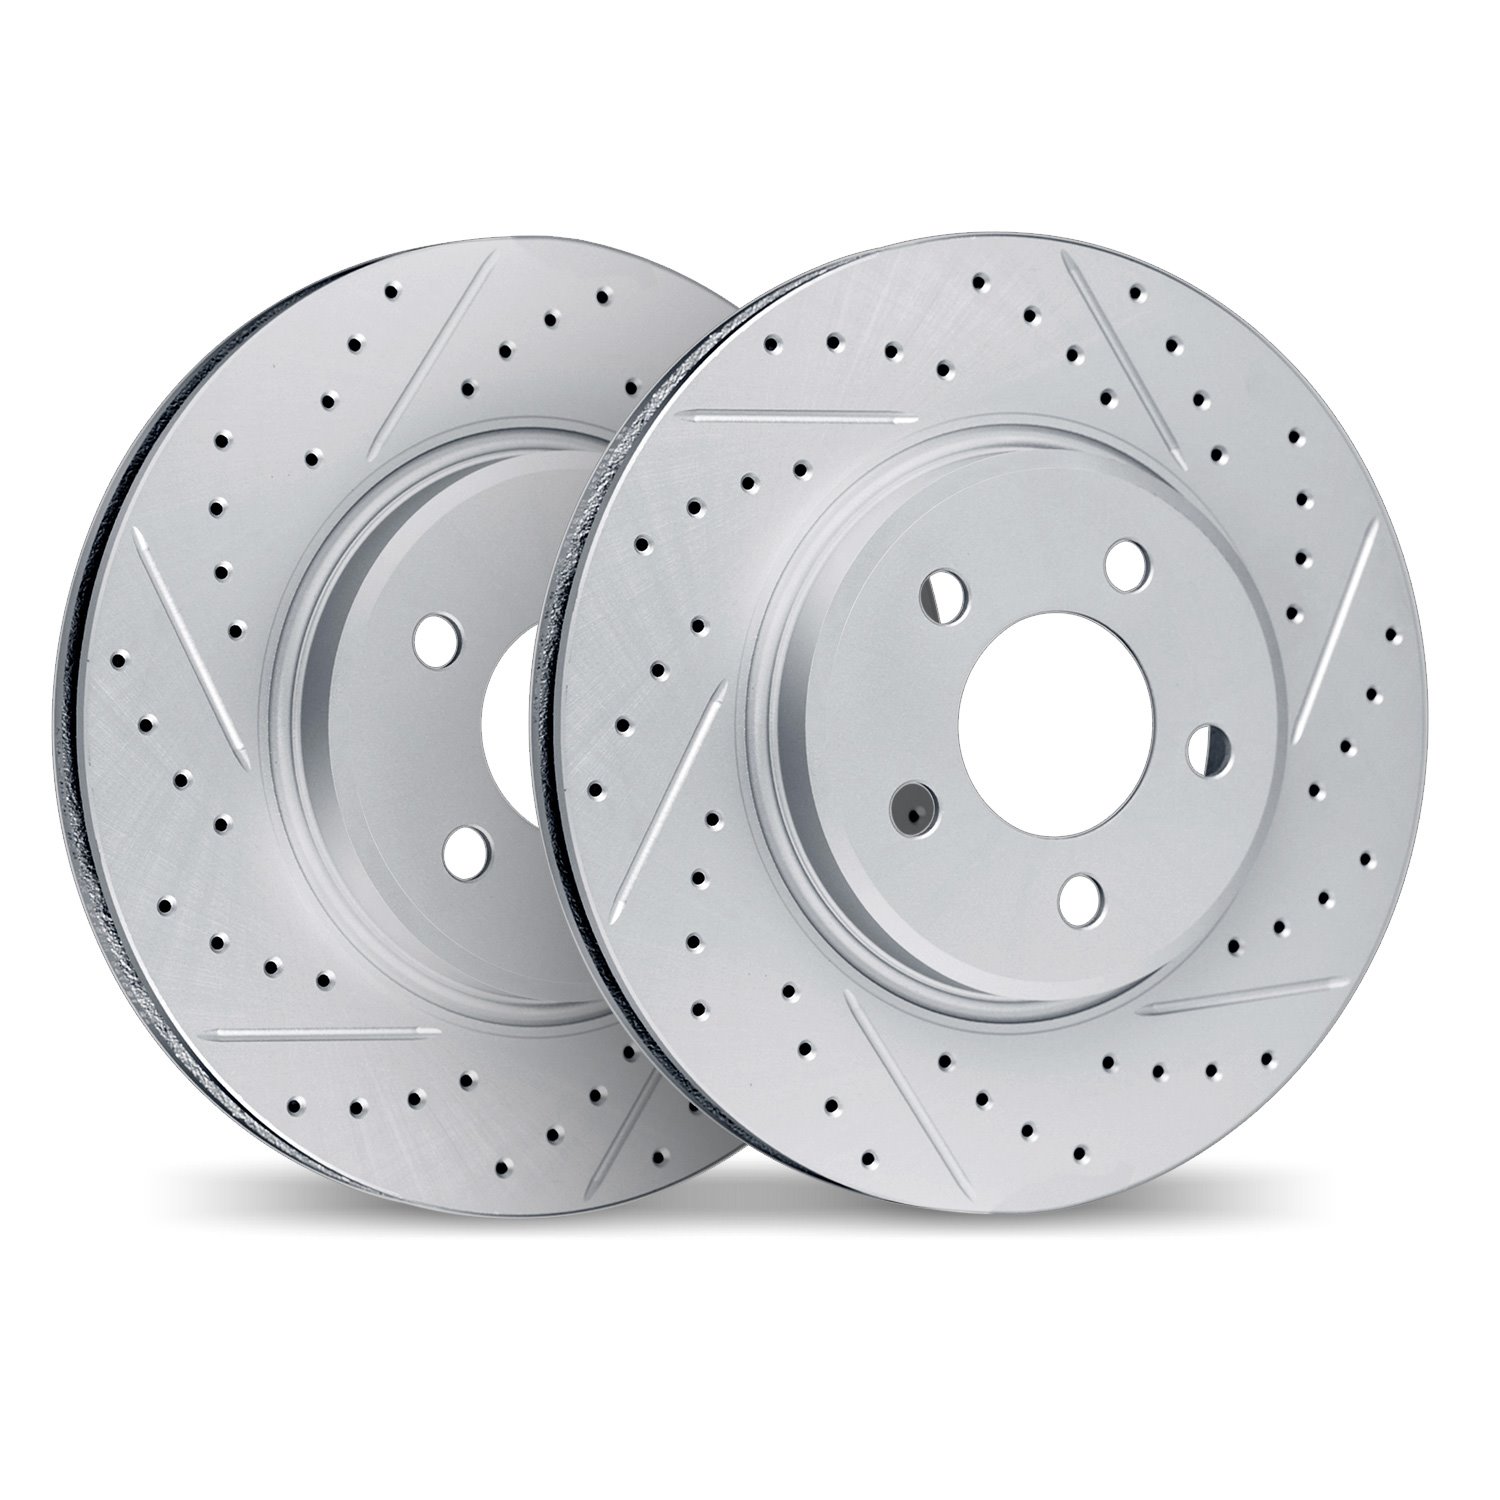 2002-31087 Geoperformance Drilled/Slotted Brake Rotors, 2000-2006 BMW, Position: Rear